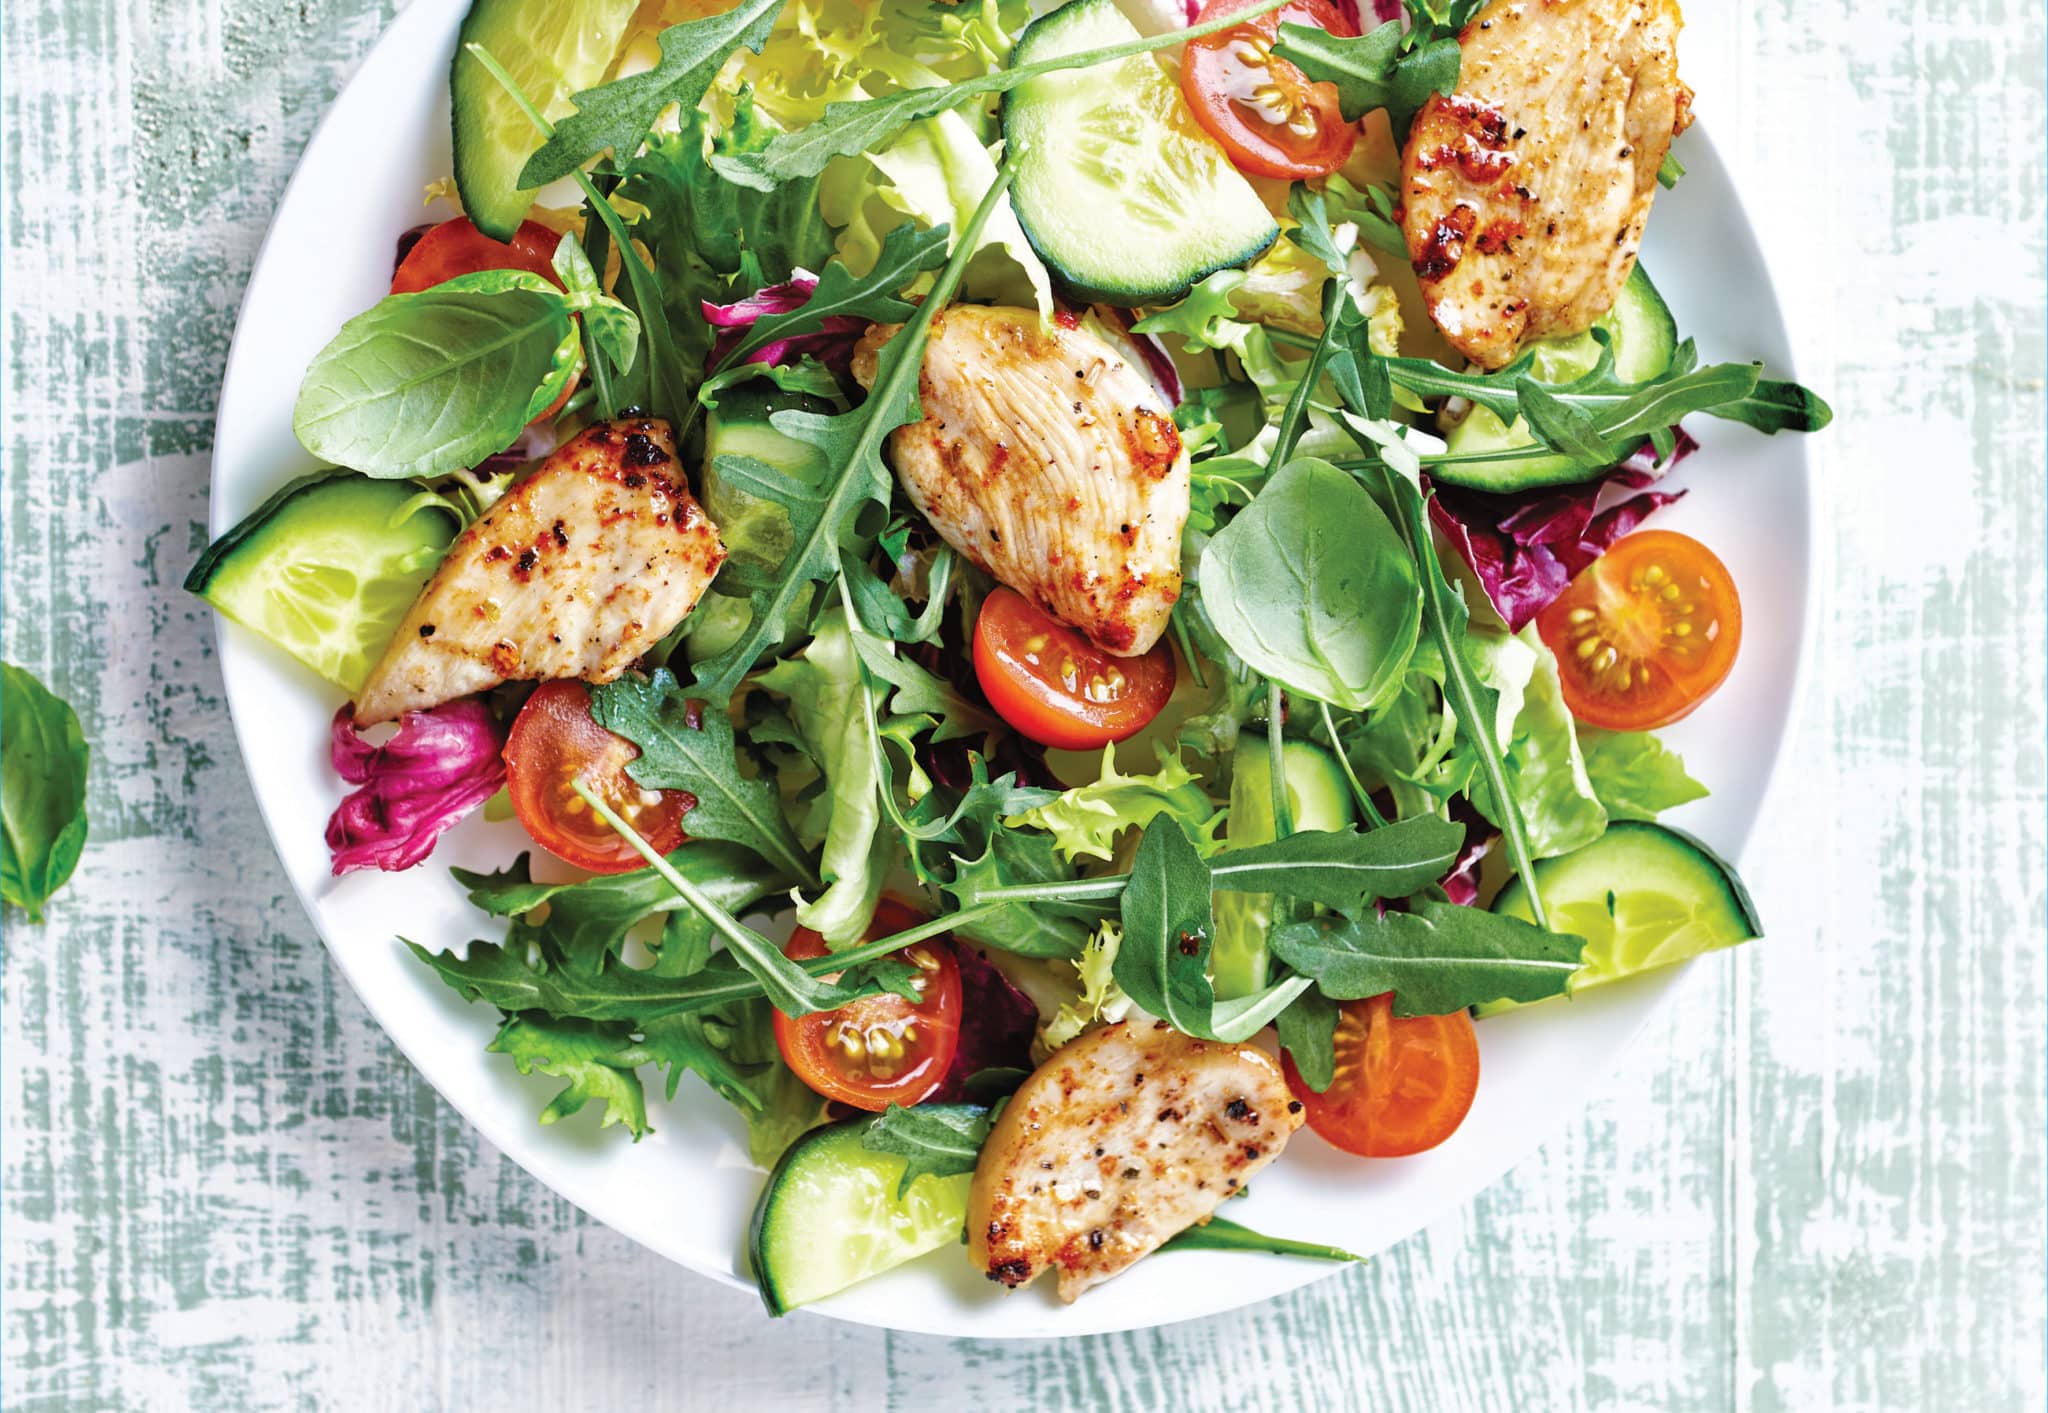 Green salad in white bowl with chicken, tomatoes and cucumber